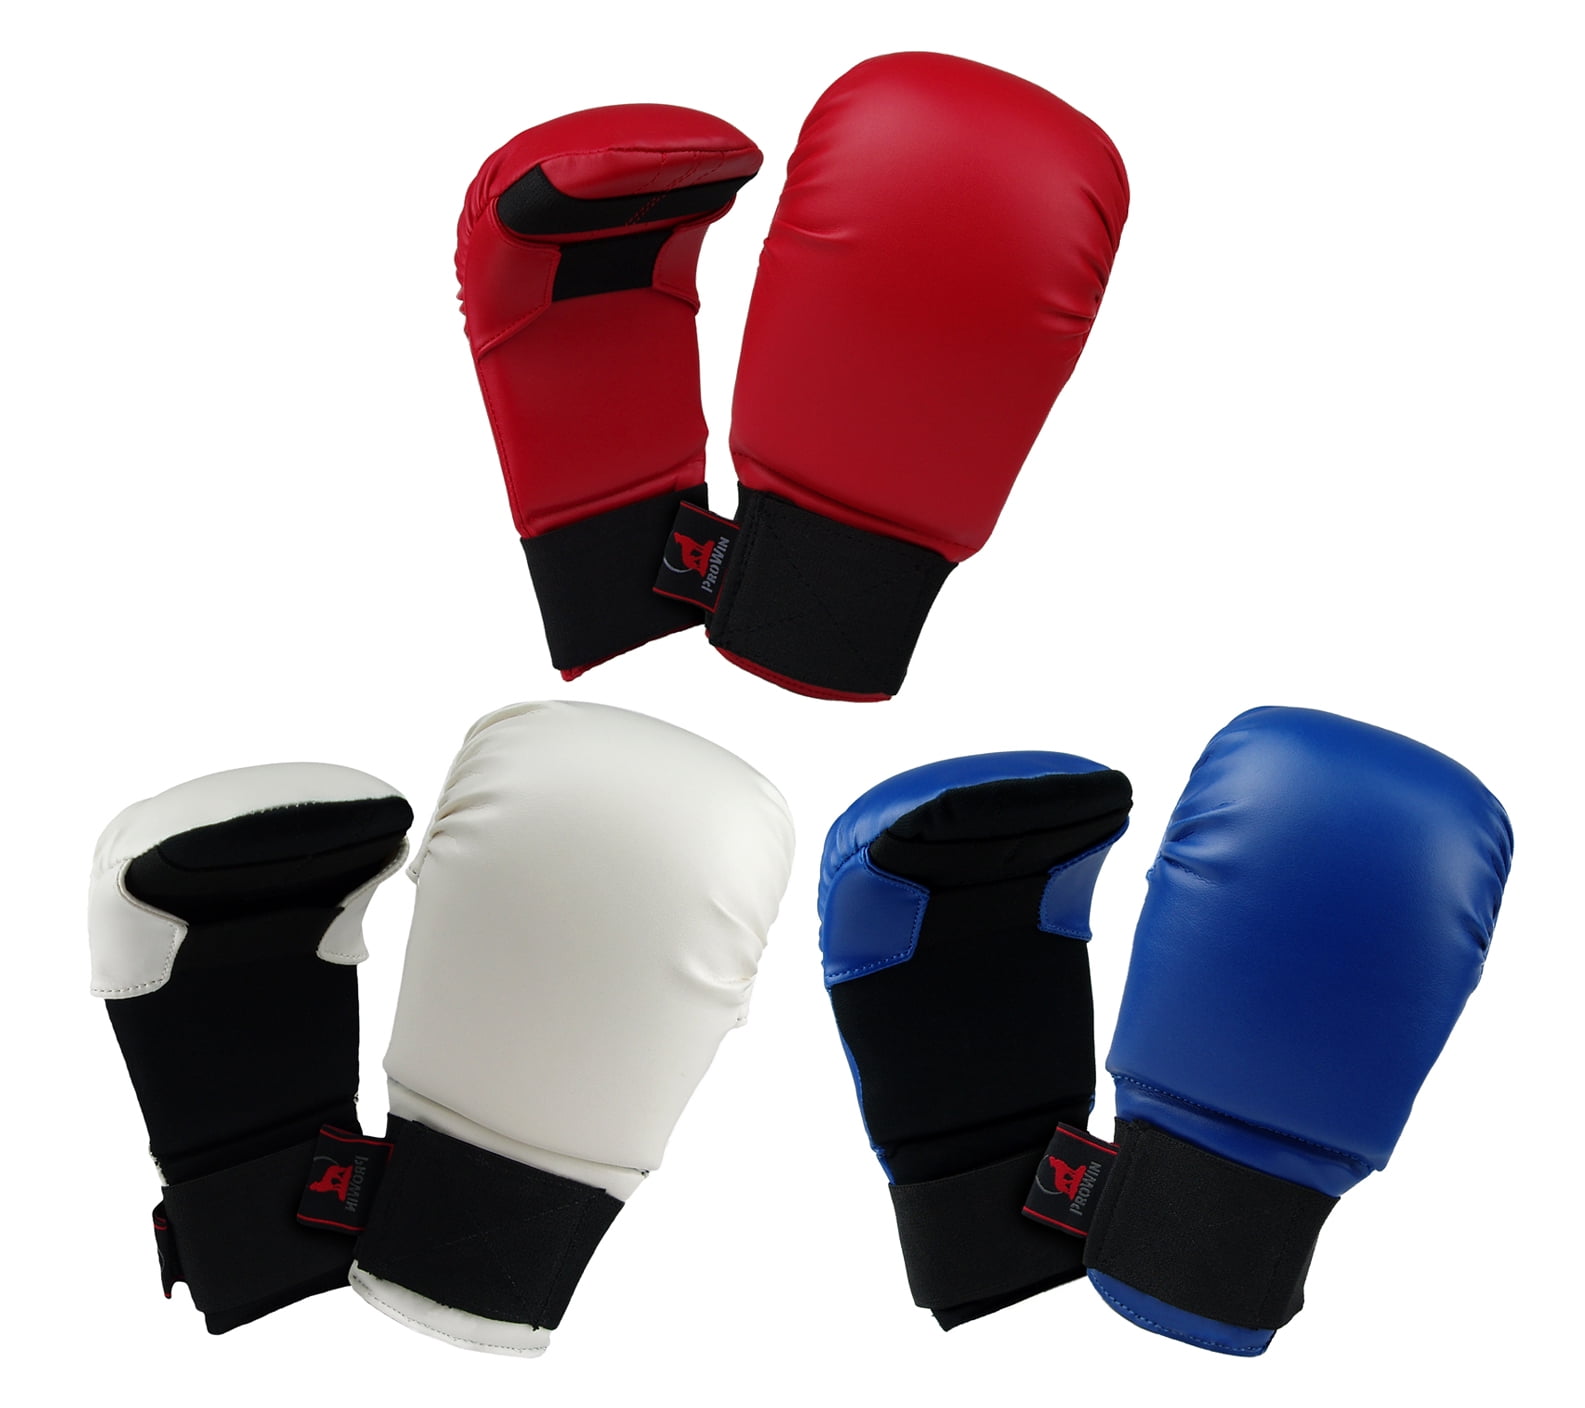 Velo karate mittens gloves sparring Competition & training martial arts 